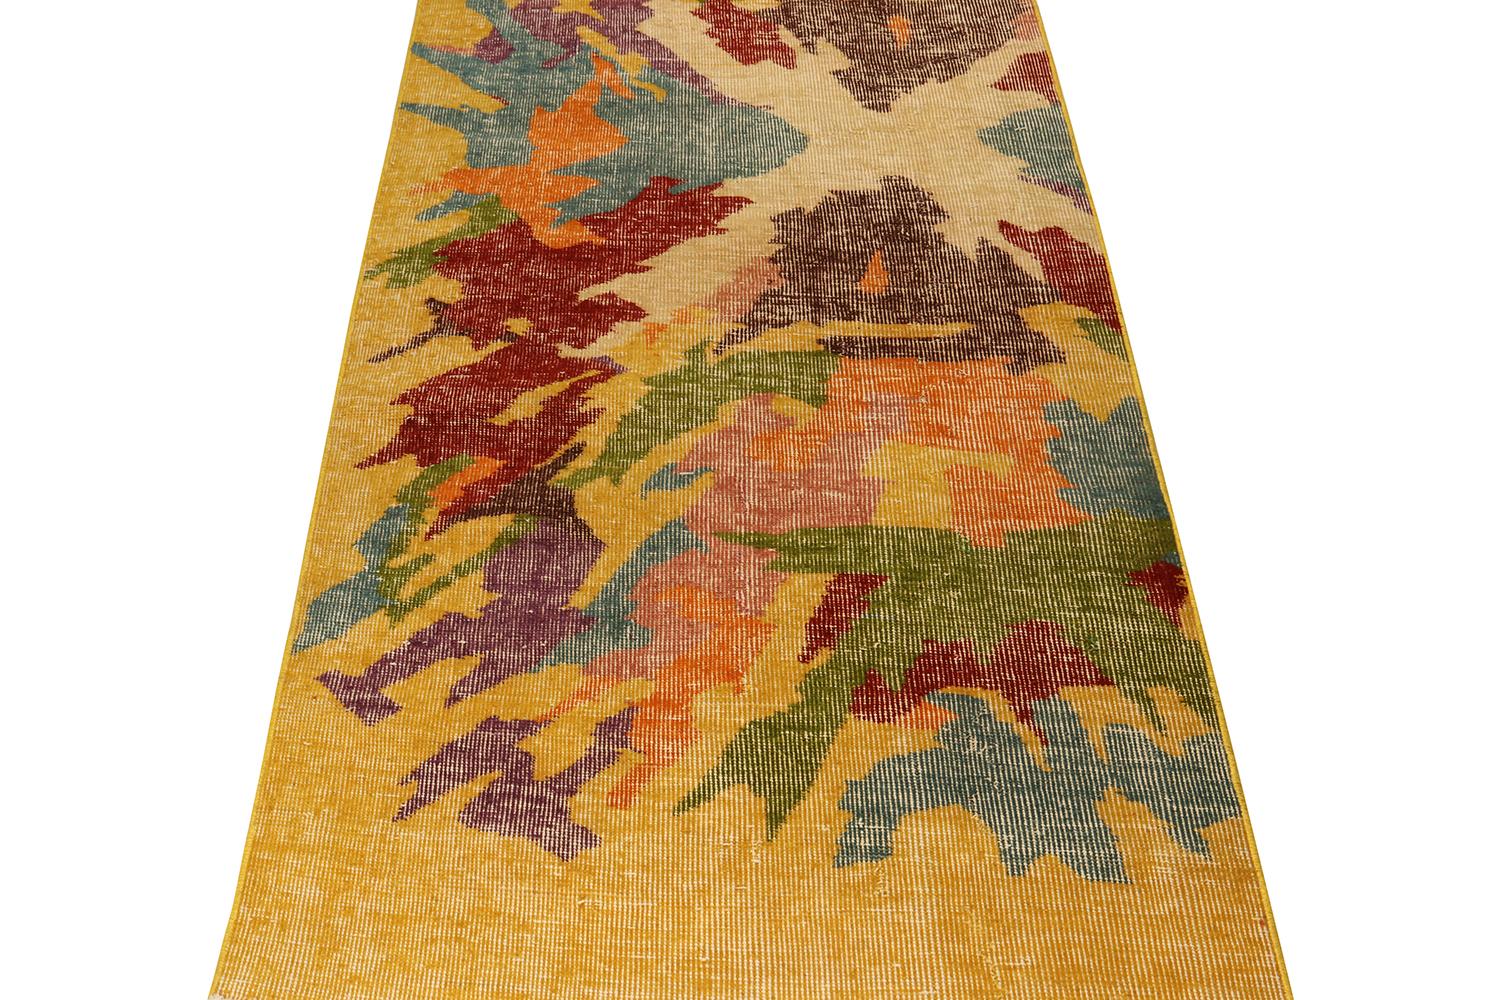 This vintage 3x5 rug is a new addition to Rug & Kilim’s Mid-Century Pasha Collection. This line is a 
commemoration, with rare curations we believe to hail from multidisciplinary Turkish designer Zeki Müren.

Further on the Design:

Inspired by